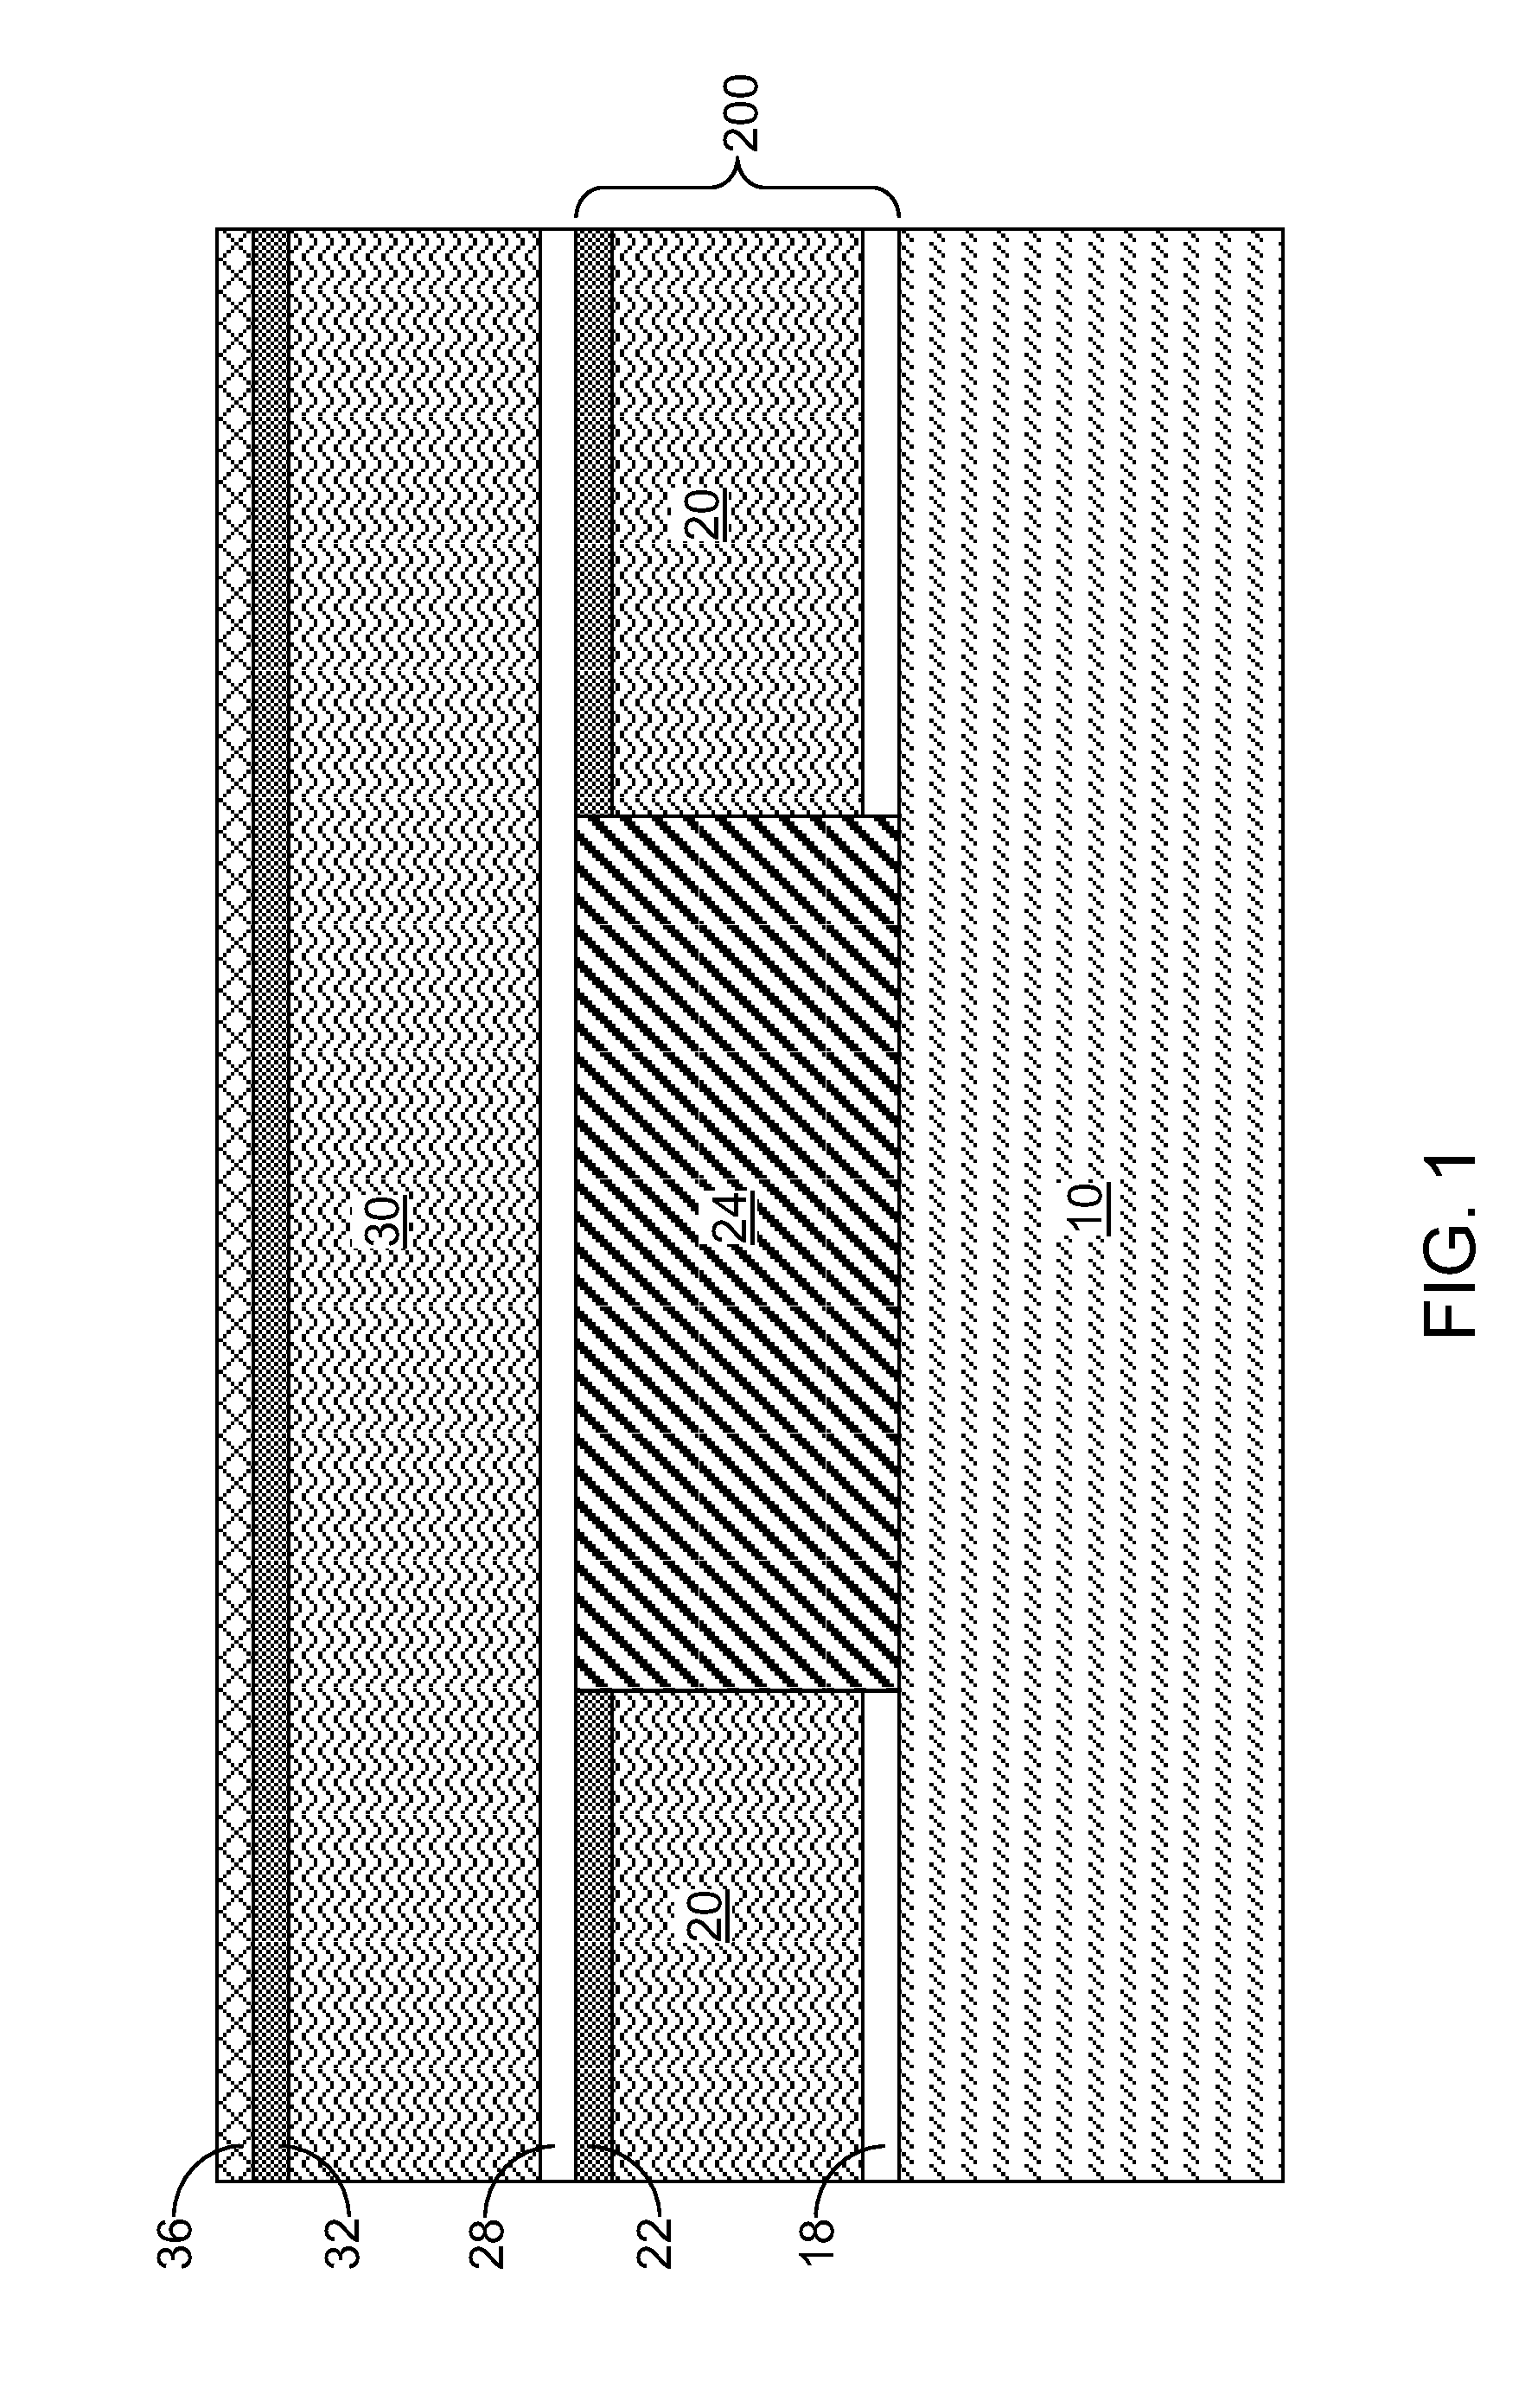 Low energy etch process for nitrogen-containing dielectric layer